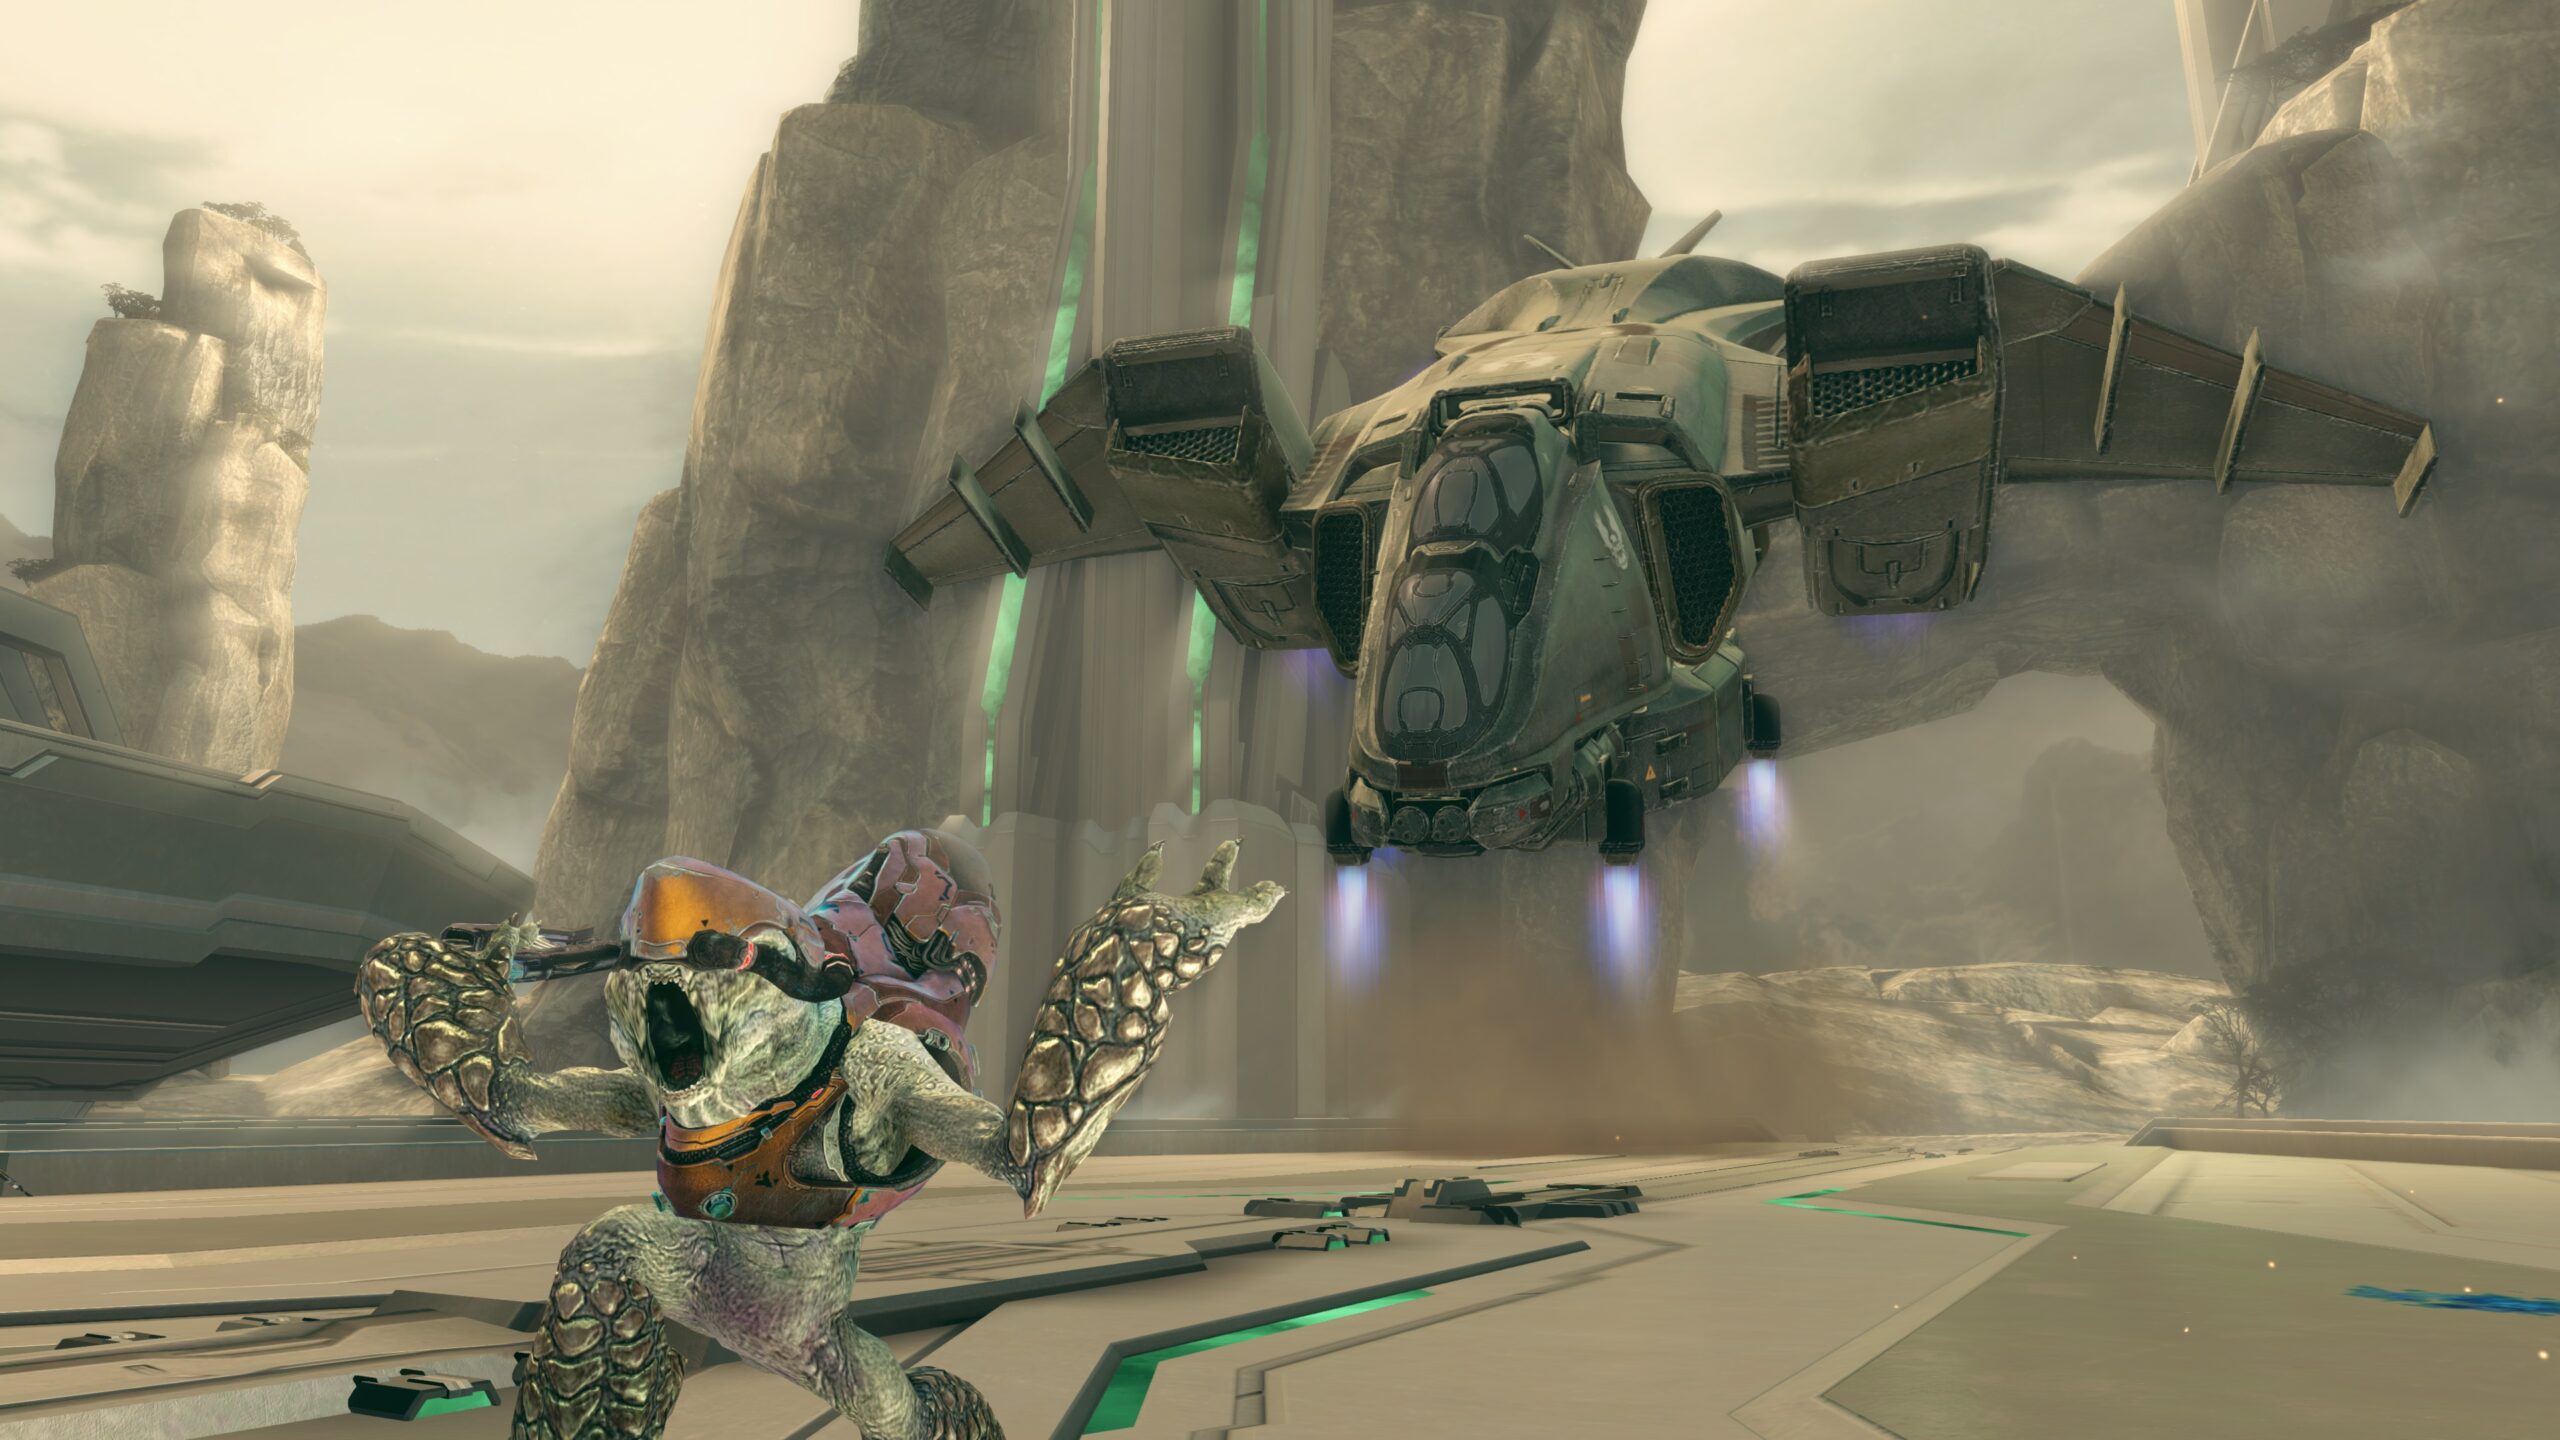 Halo 4 Spartan Ops in-game screenshot of a Grunt screaming while running away from a Pelican dropship's surprise appearance